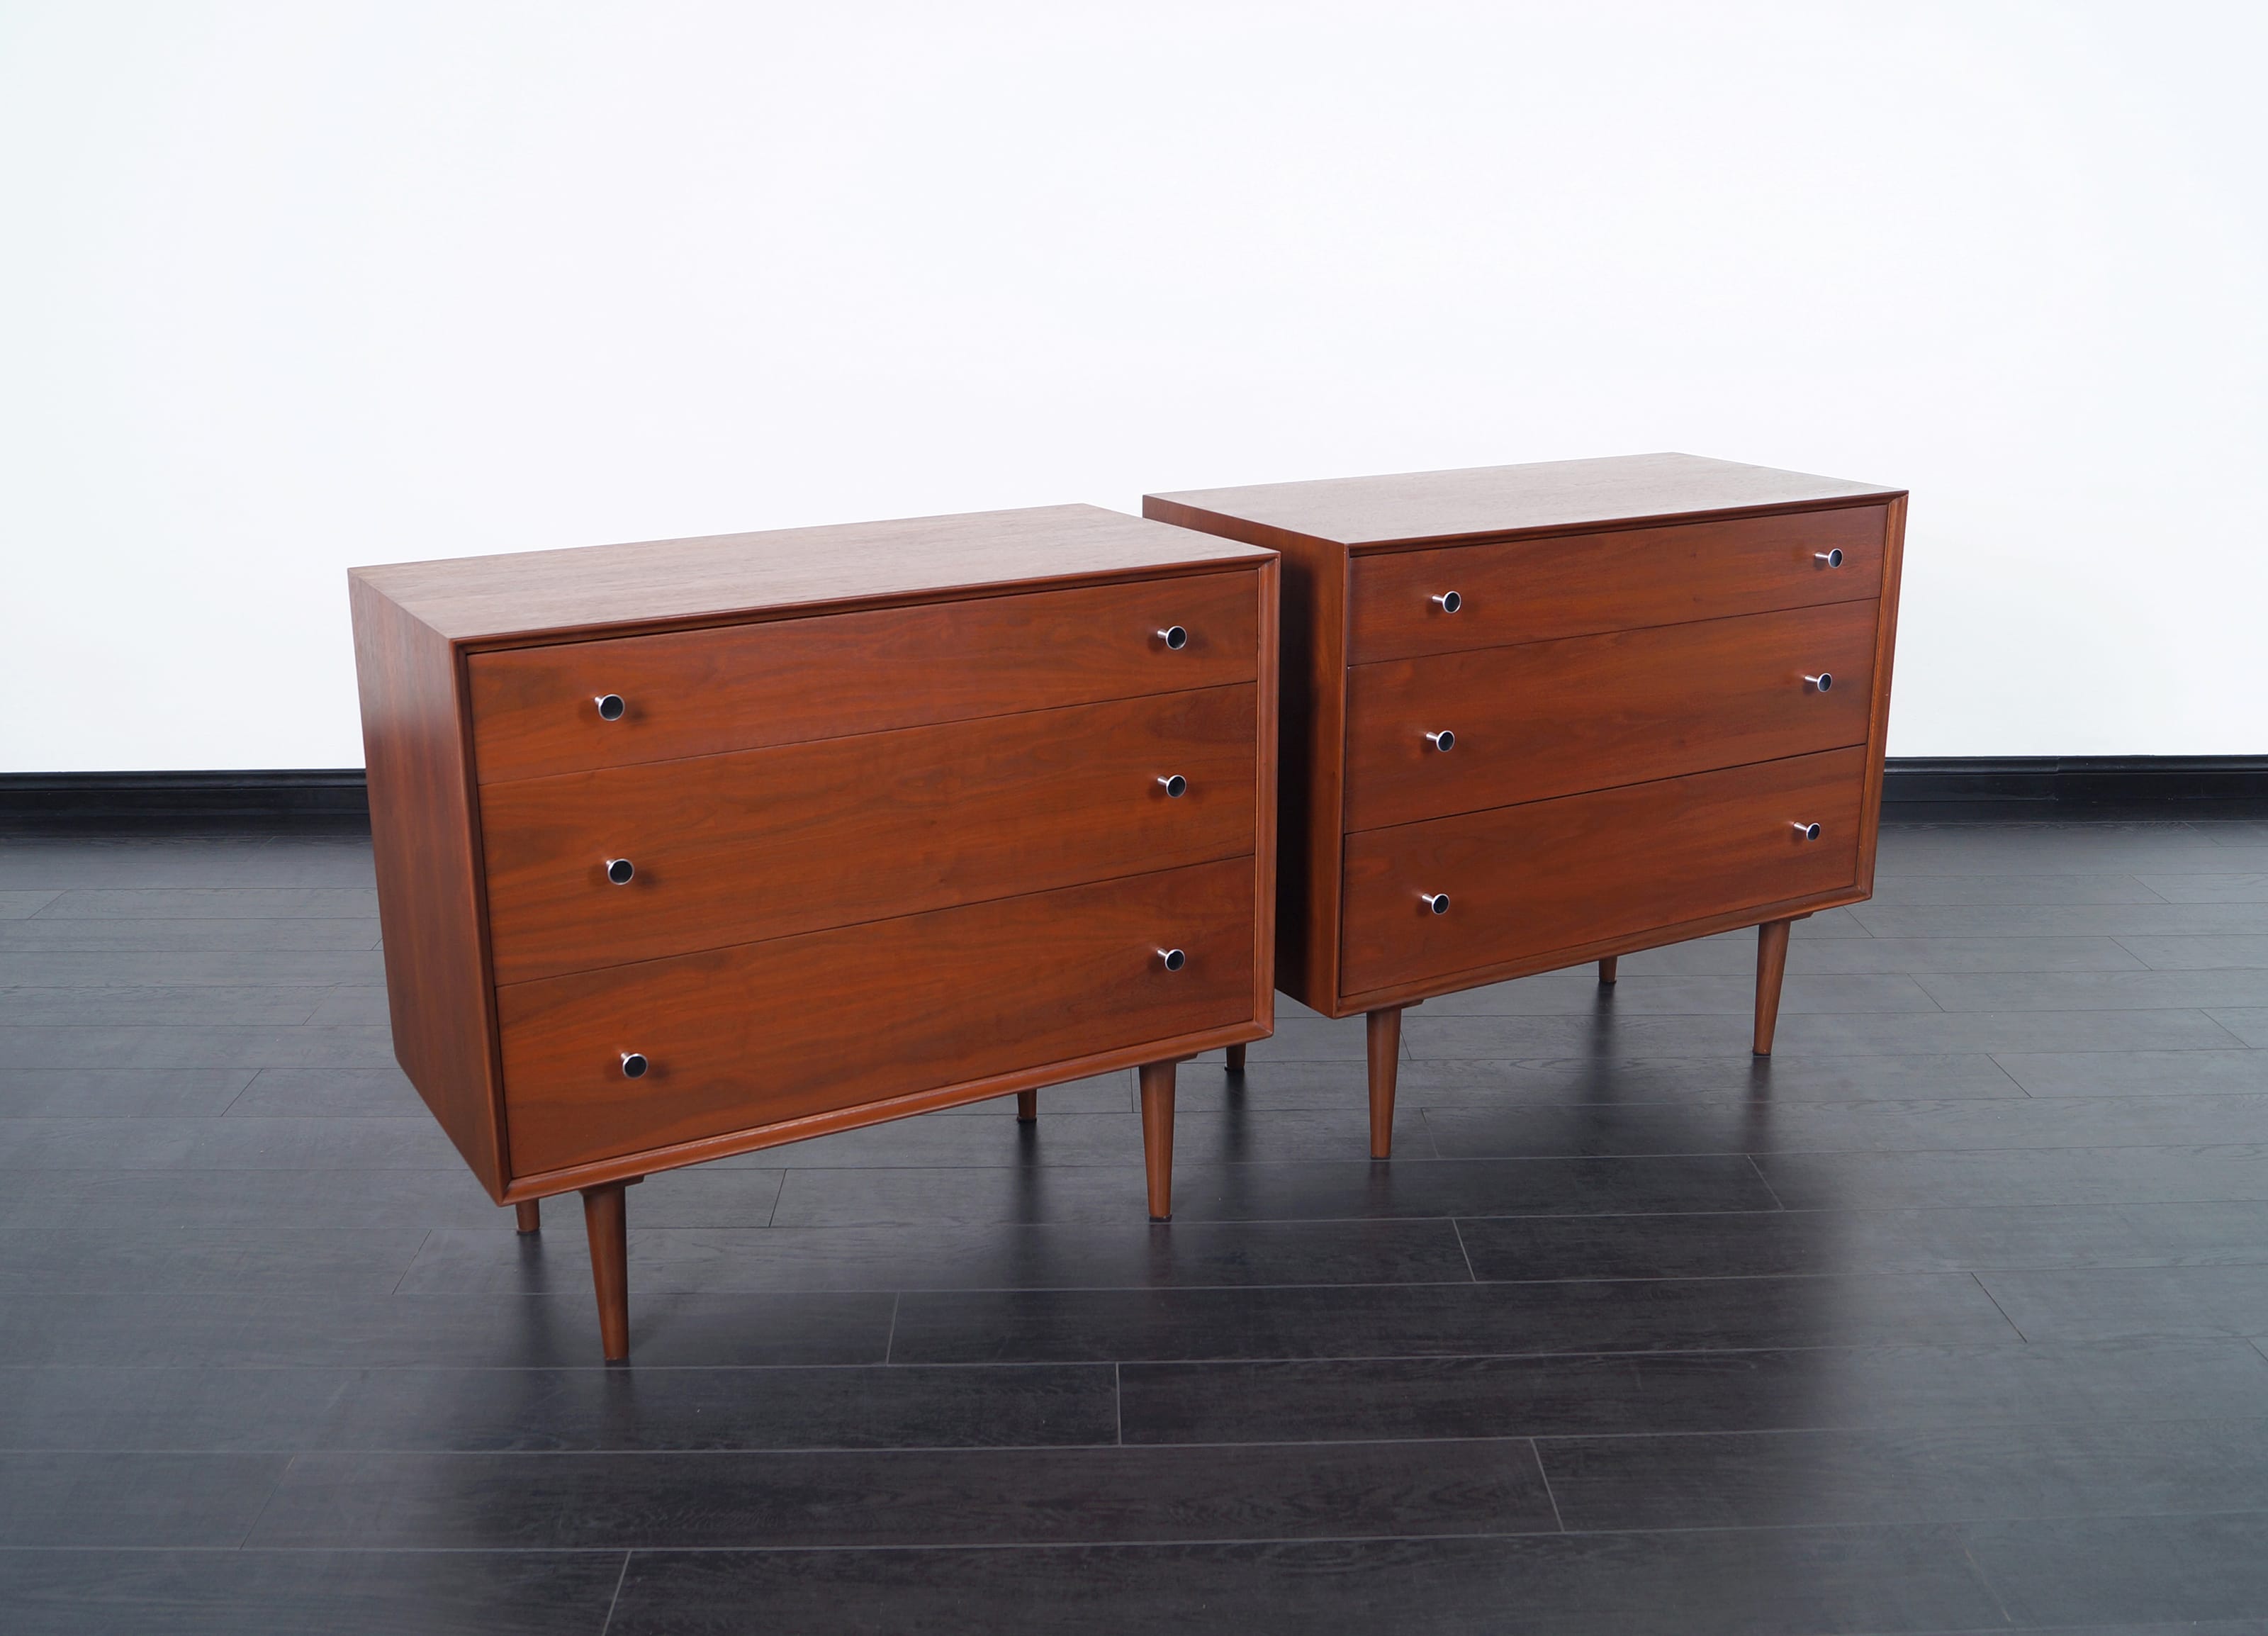 Vintage Walnut Chest of Drawers by Robert Baron